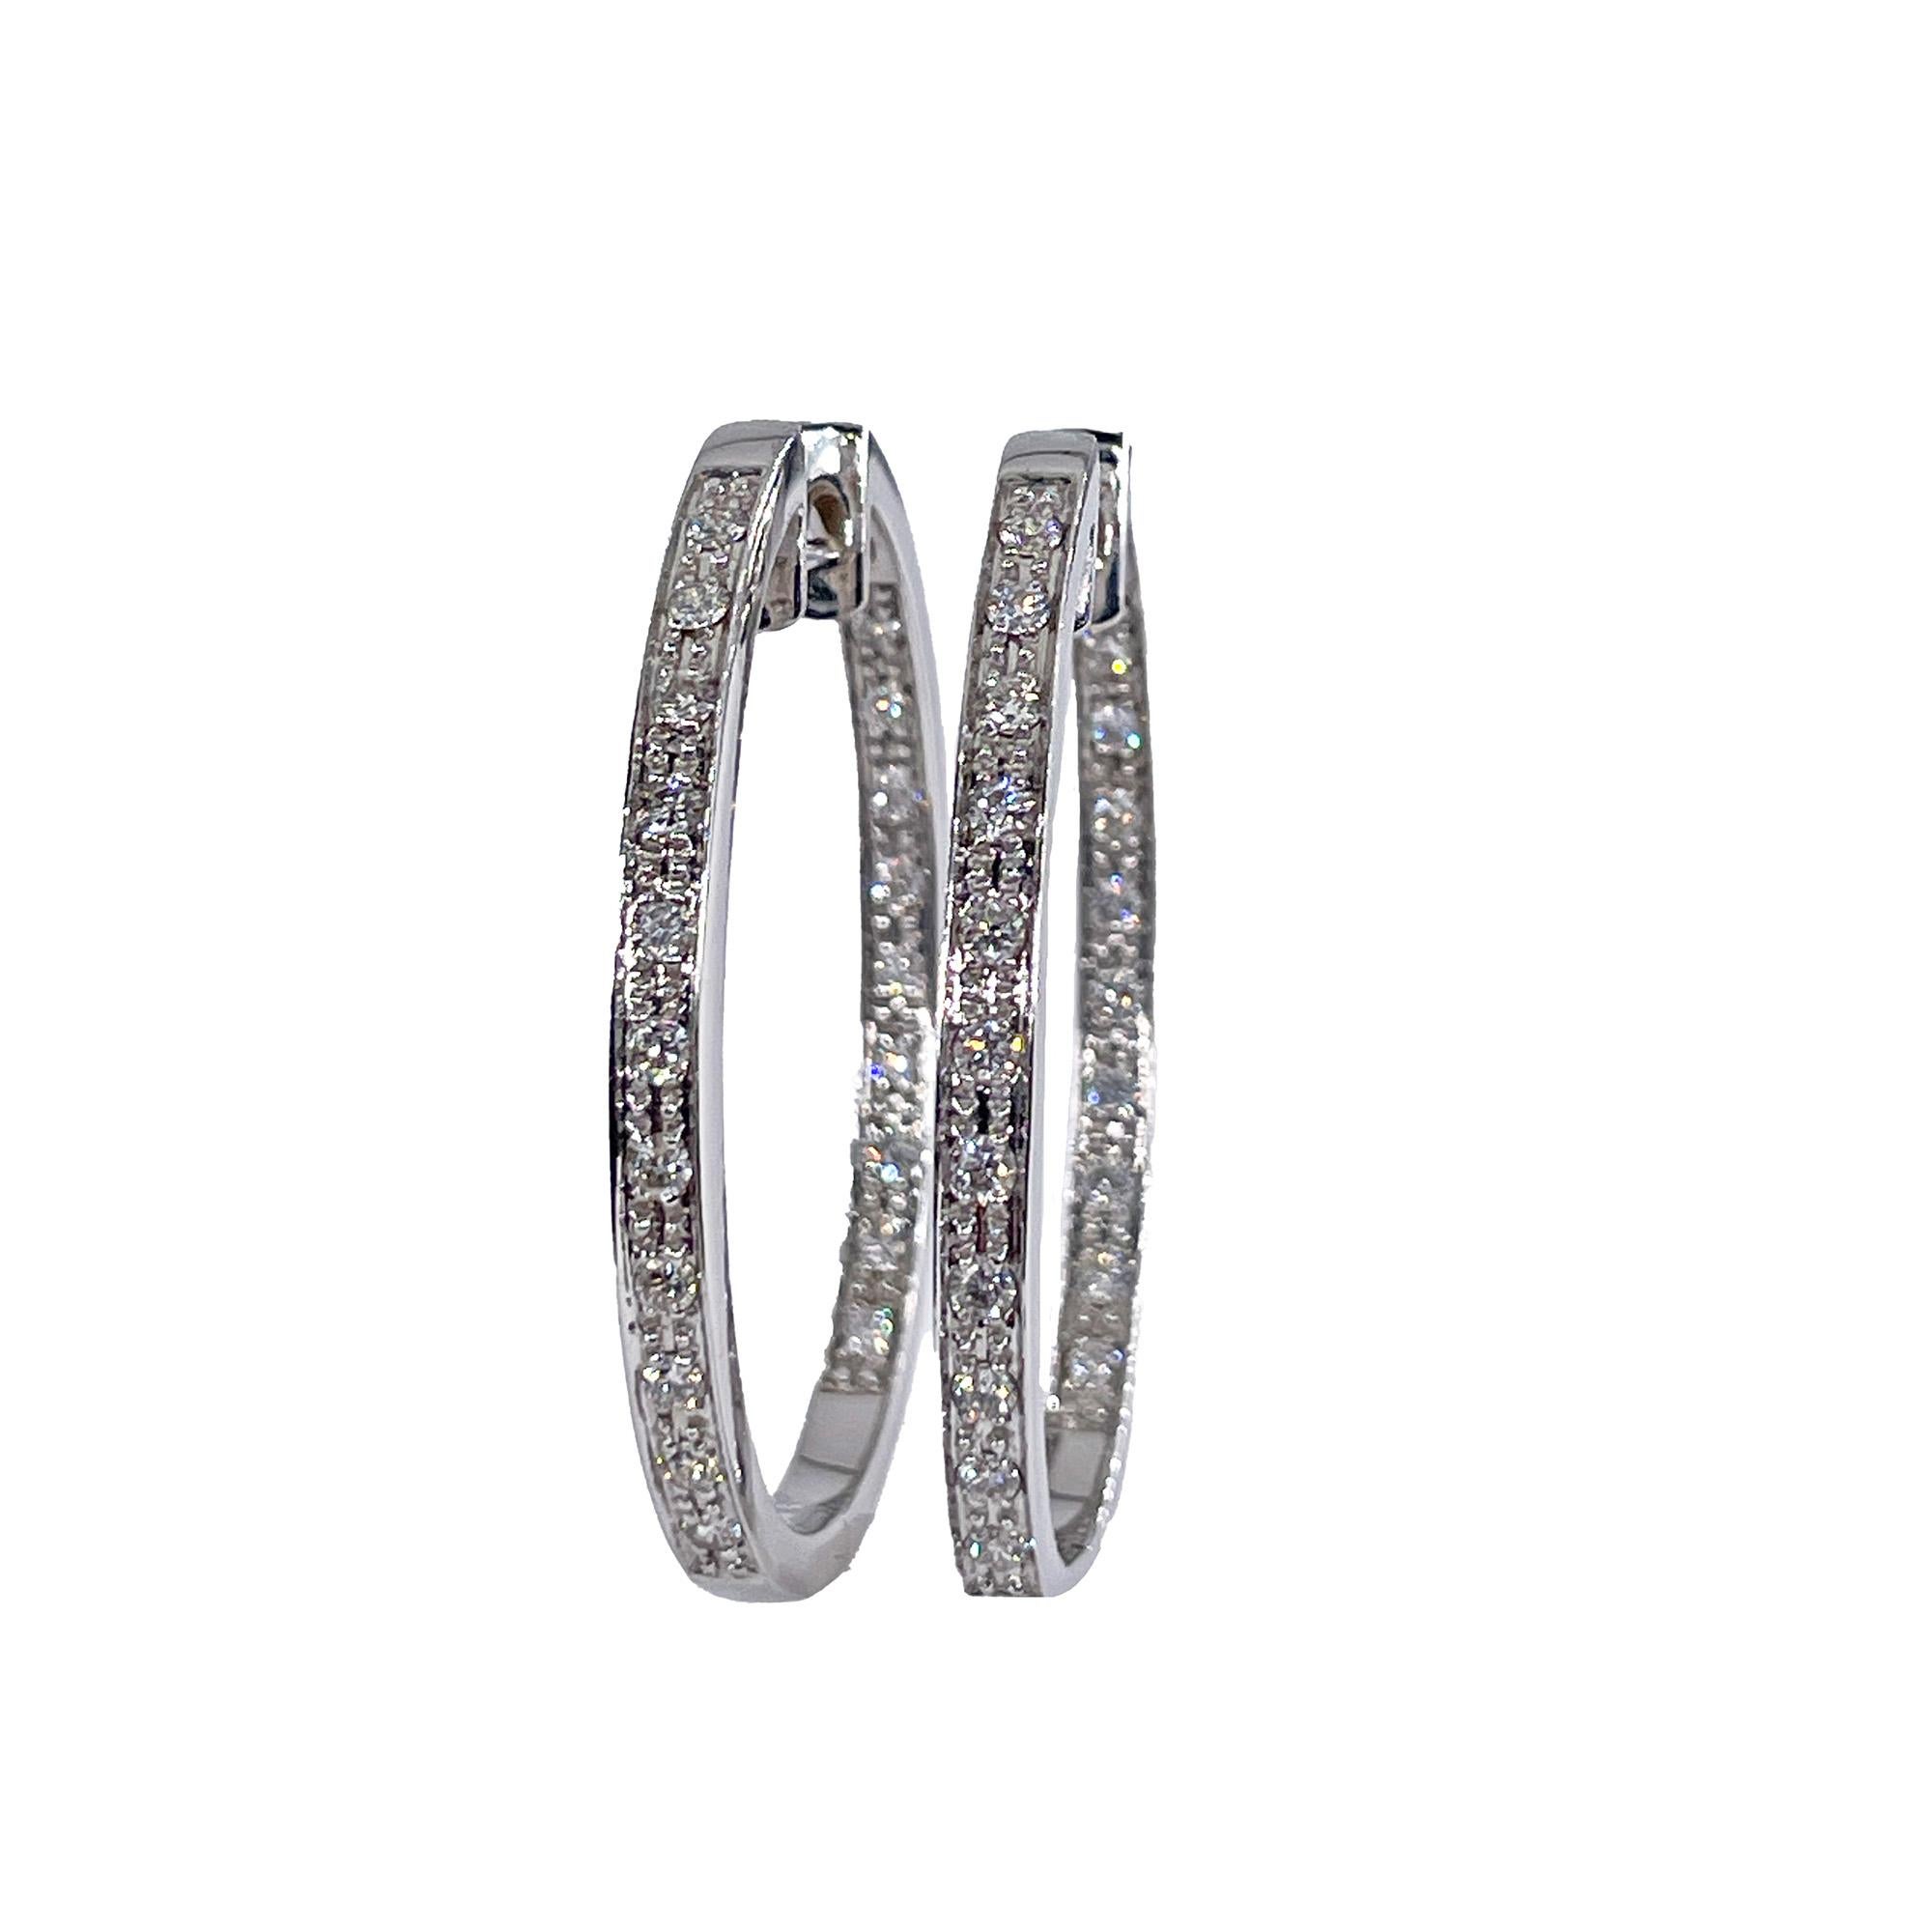 Sonia B. Bitton 1.1ctw Diamond Hoop Earrings Inside Out Oval 14k White Gold 

This great pair will make the perfect gift: 14k white gold Sonia B. 1.1ctw elongated oval inside-out diamond hoop earrings. Sonia B Designs is a luxury fine jewelry